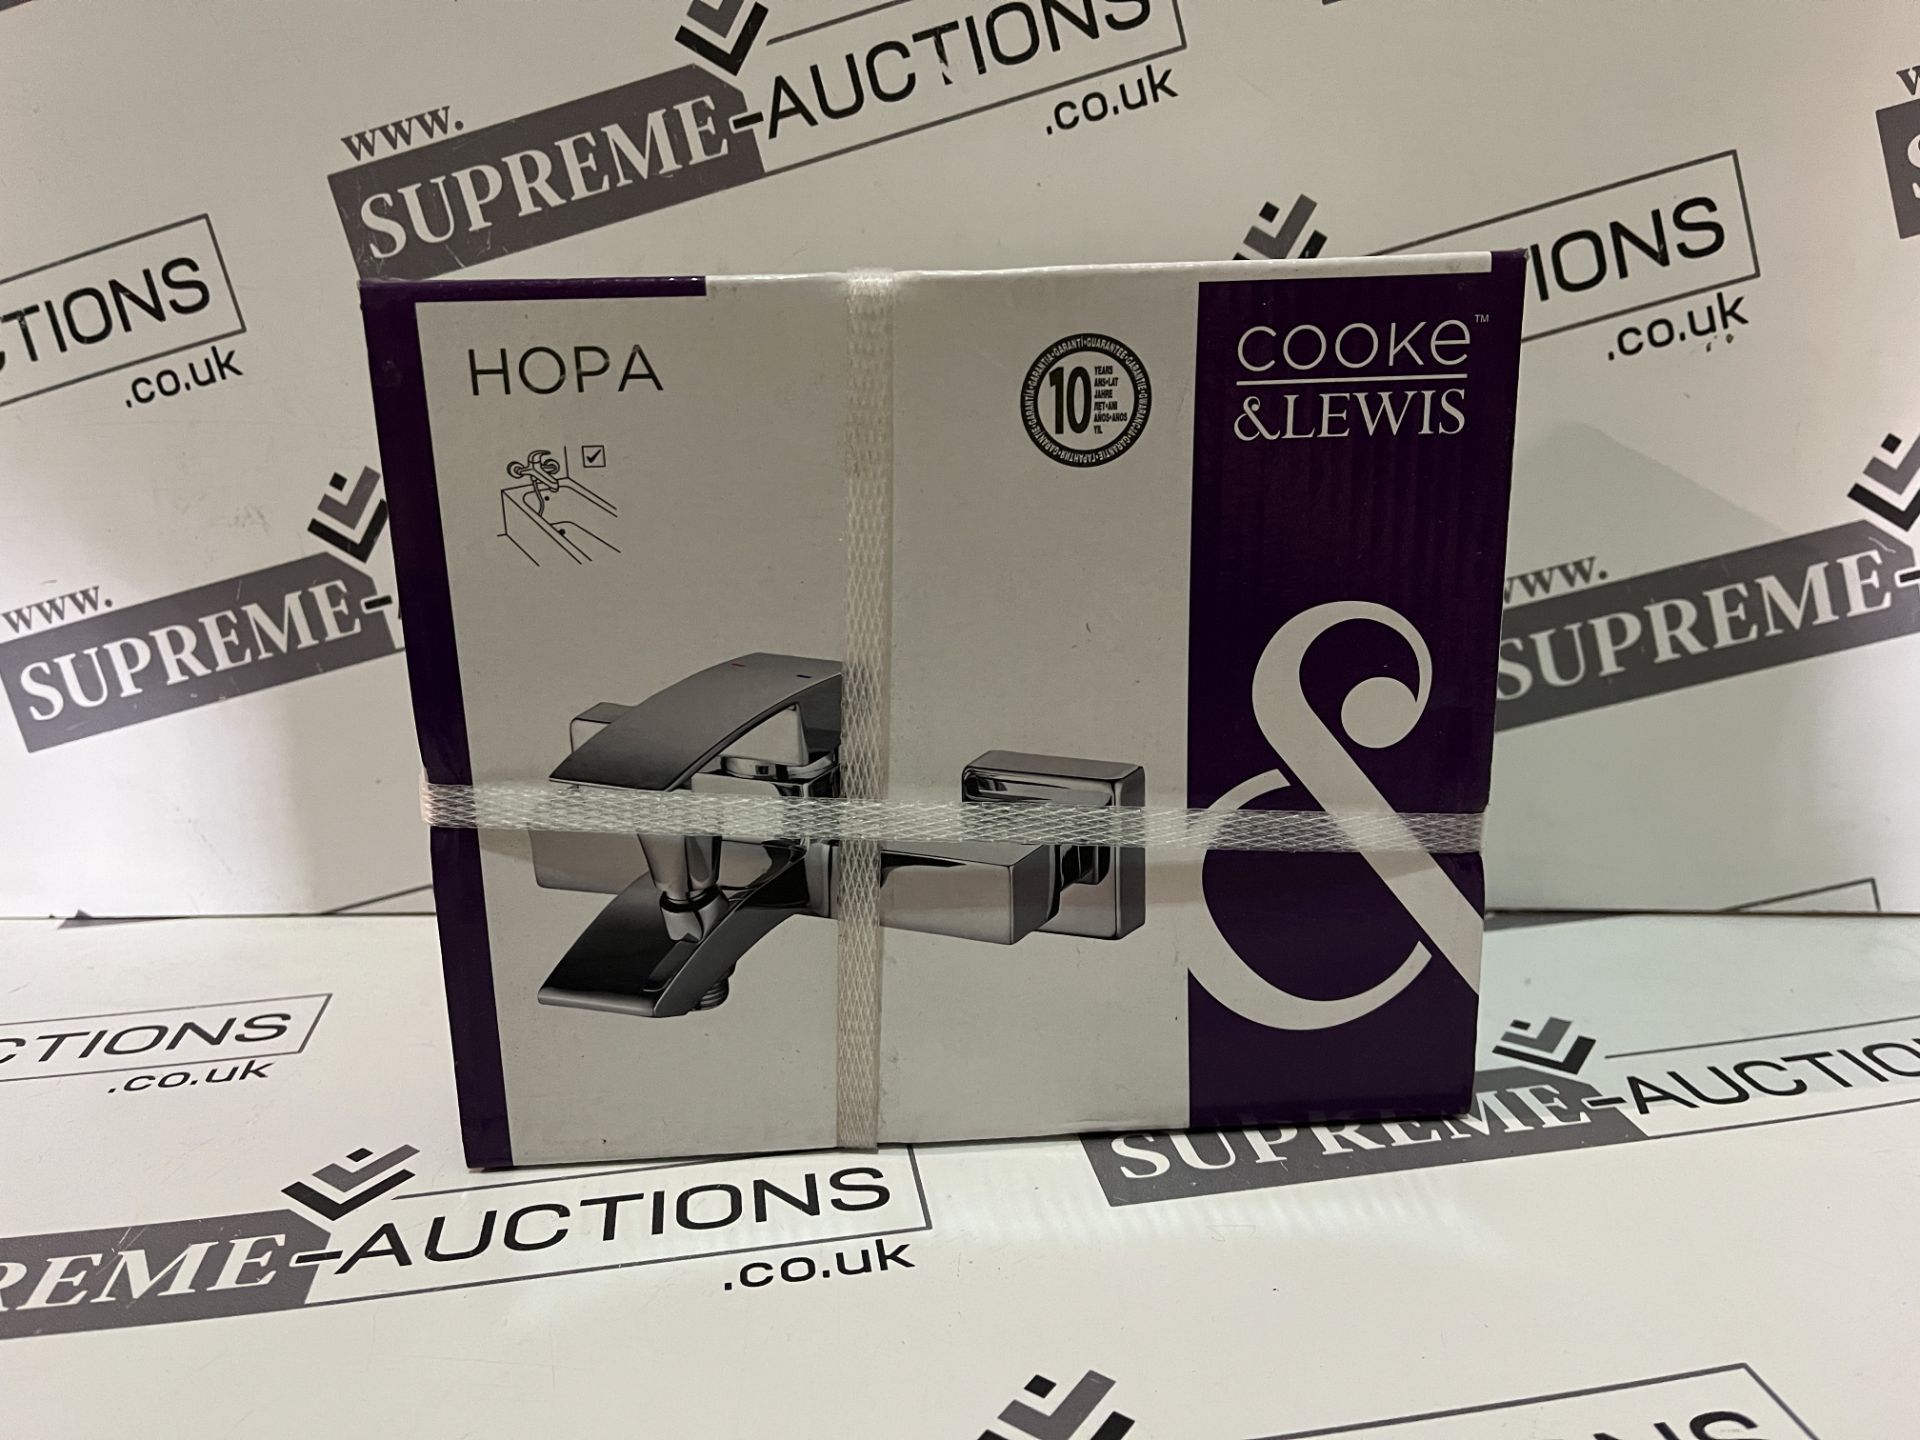 5 X BRAND NEW HOPA CHROME WALL MOUNTED CERAMIC SHOWER MIXER TAPS S1-2